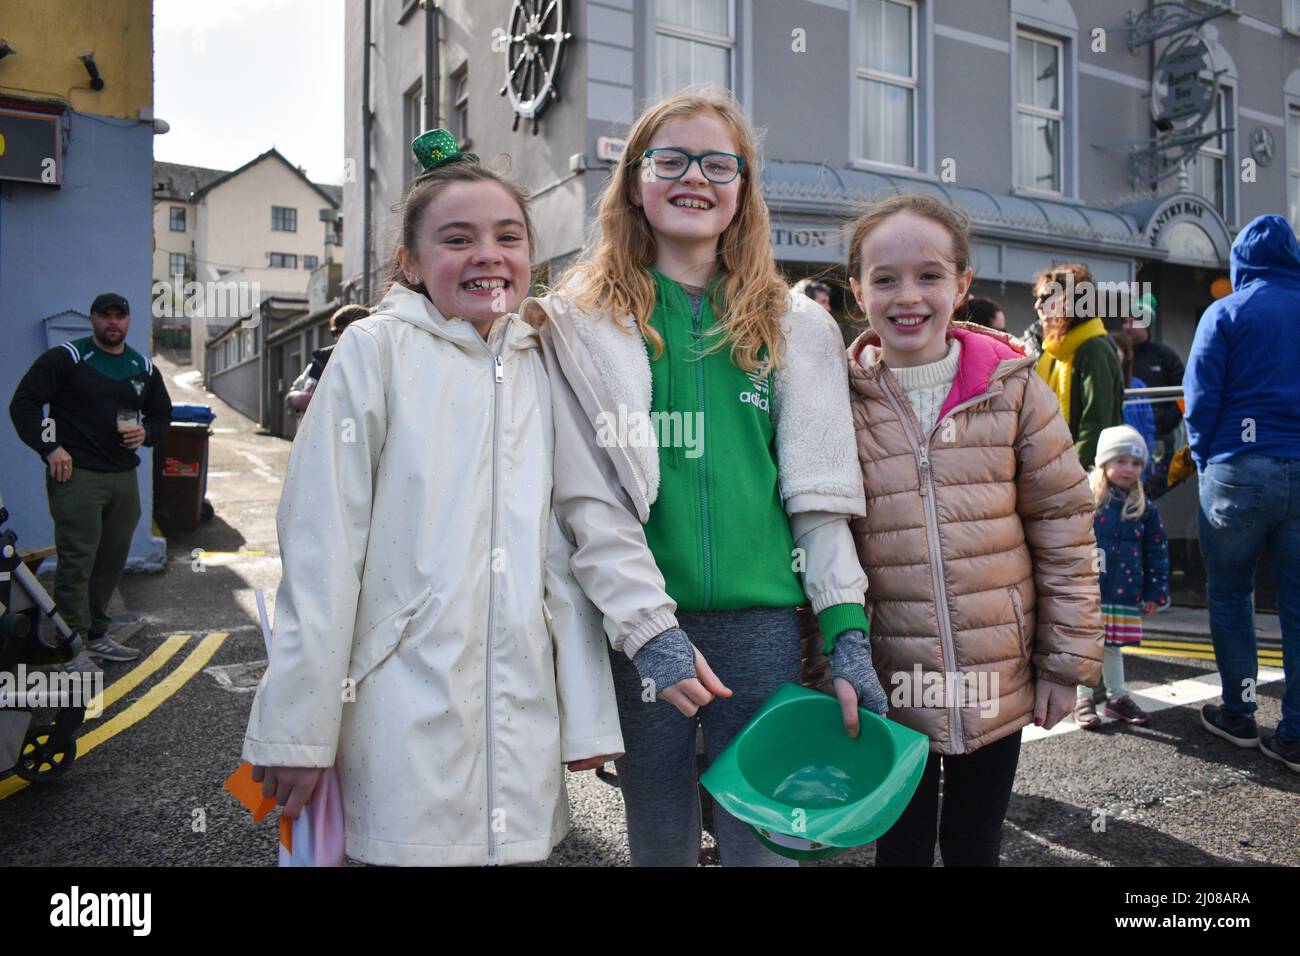 Bantry, West Cork, Ireland. 17th Mar, 2022. After a long break due to the pandemic, Saint Patrick's Day celebrations are back in full swing. A large crowd of people gathered today in the square to watch the parade and enjoy the sunny day. Pictured below: Emily, Millian and Kate. Credit: Karlis Dzjamko/Alamy Live News Stock Photo